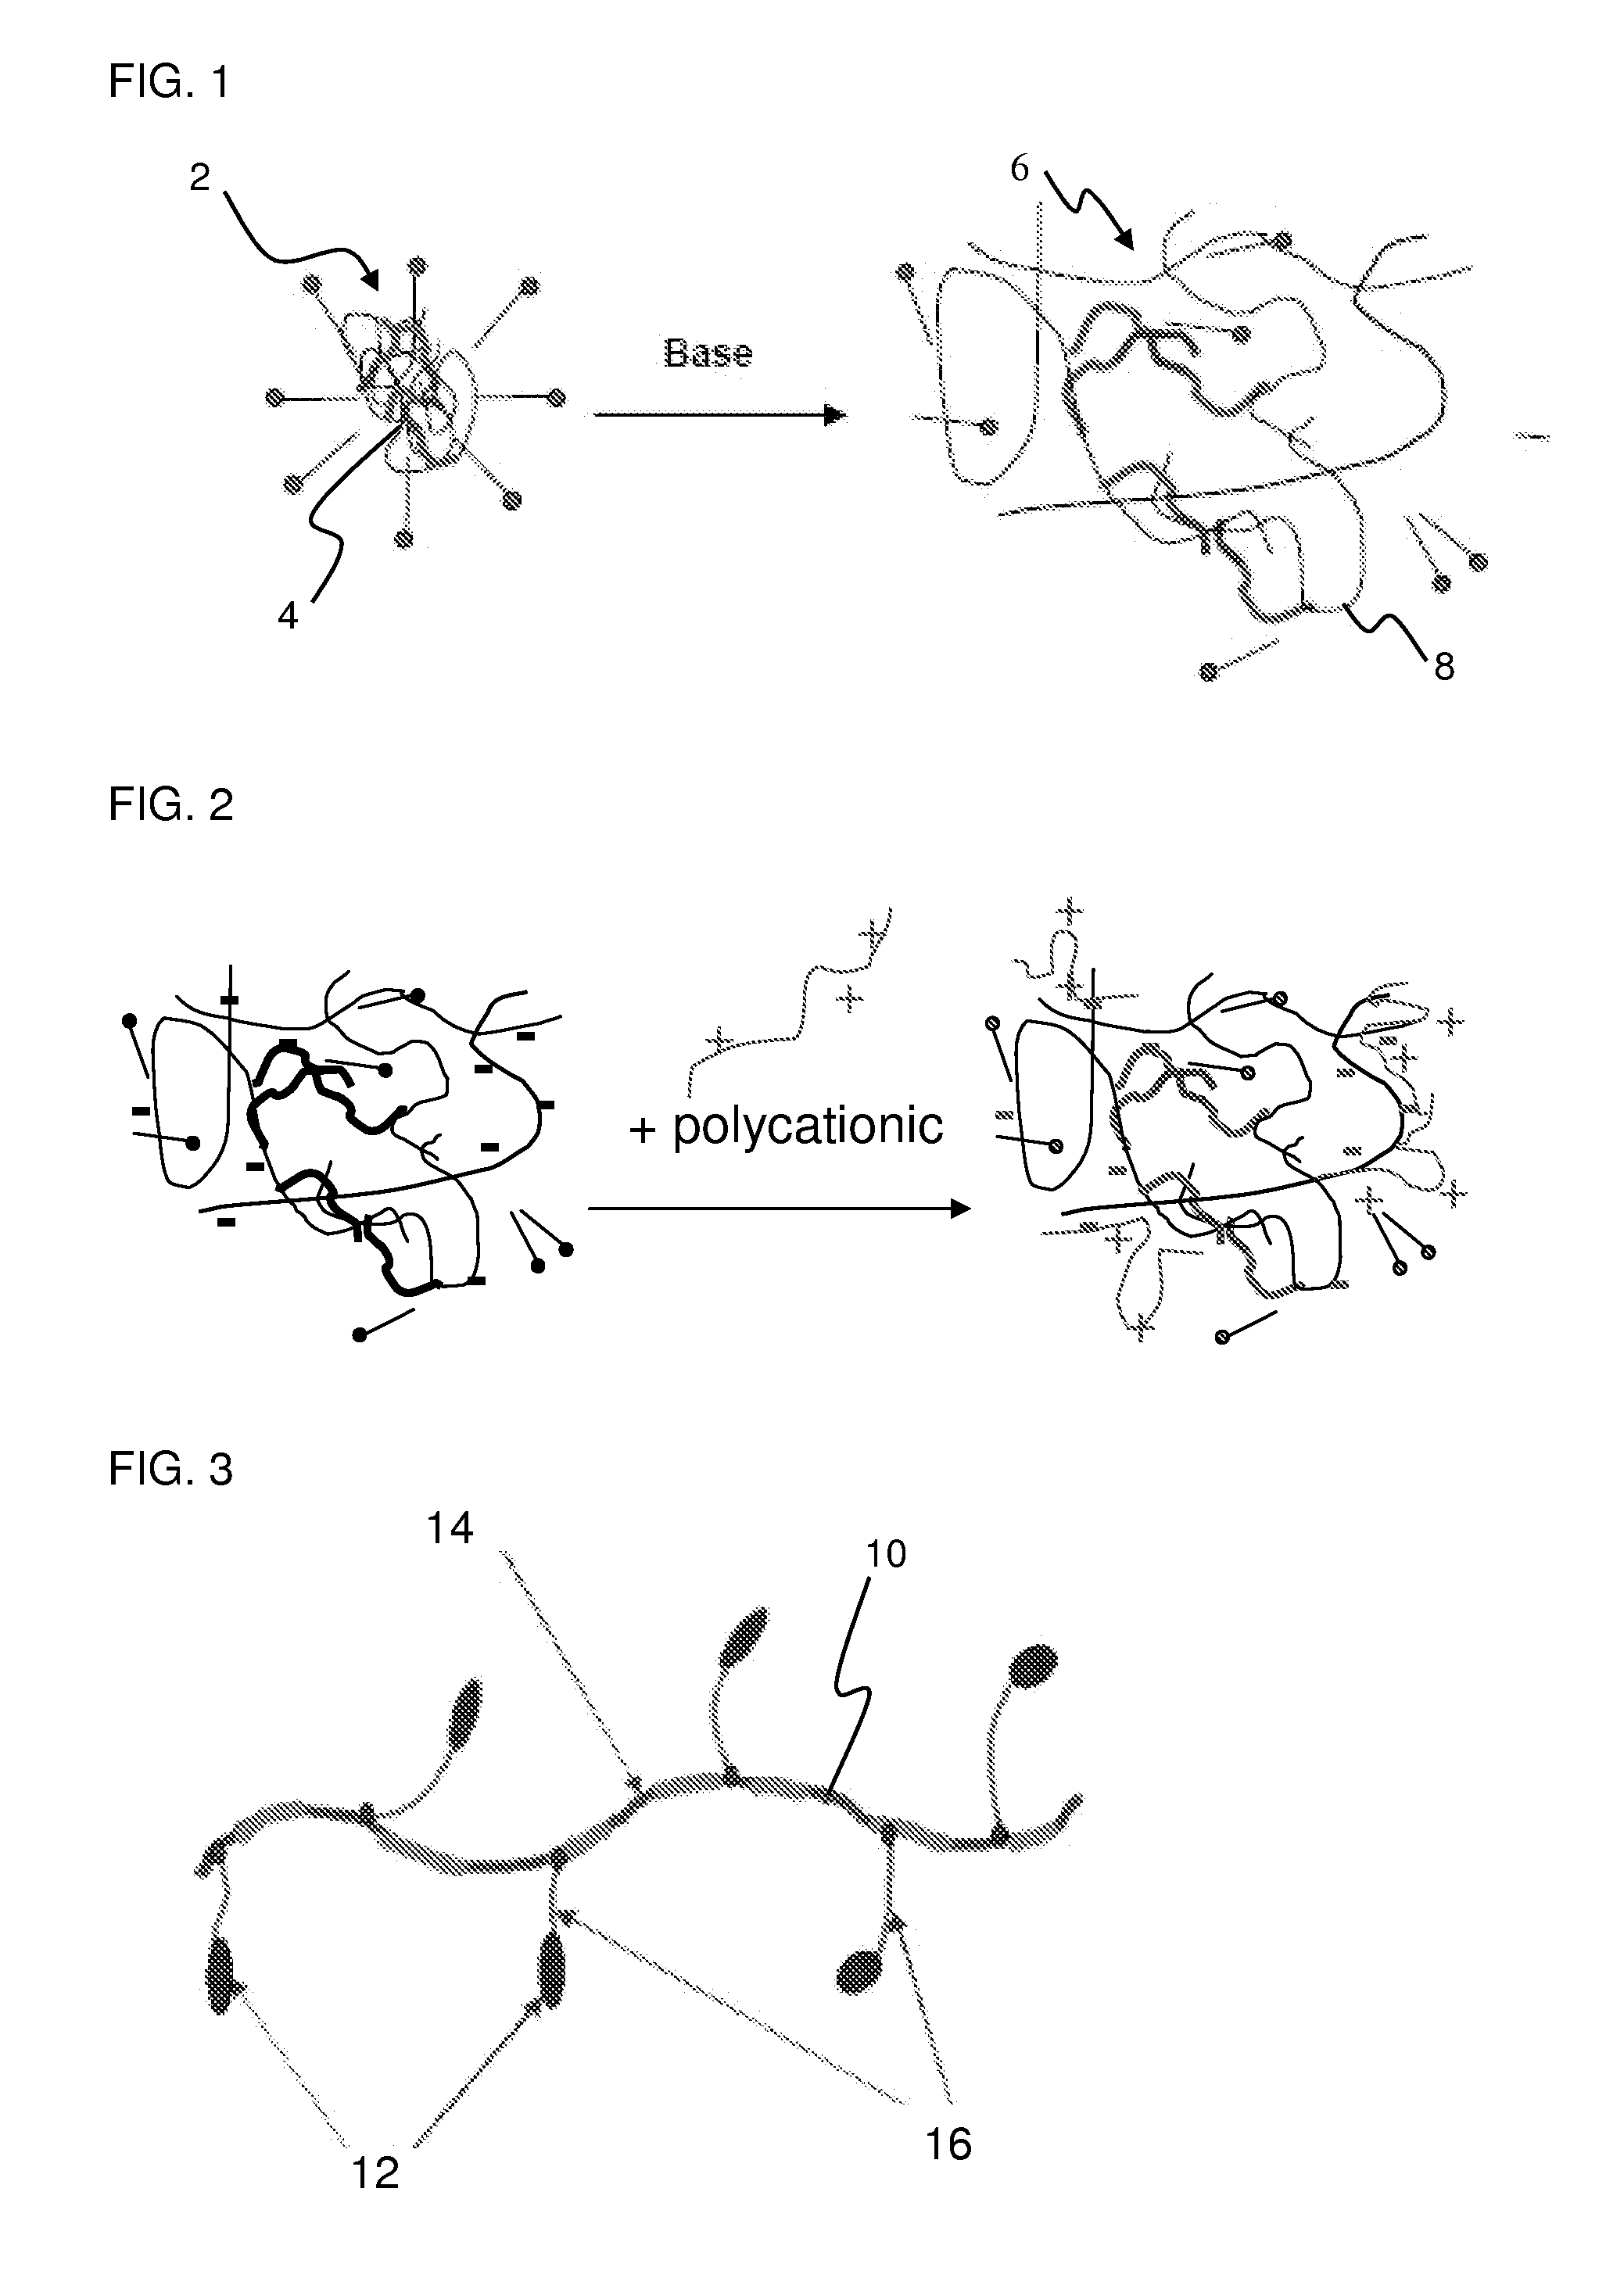 Rheology modifier compositions and methods of use